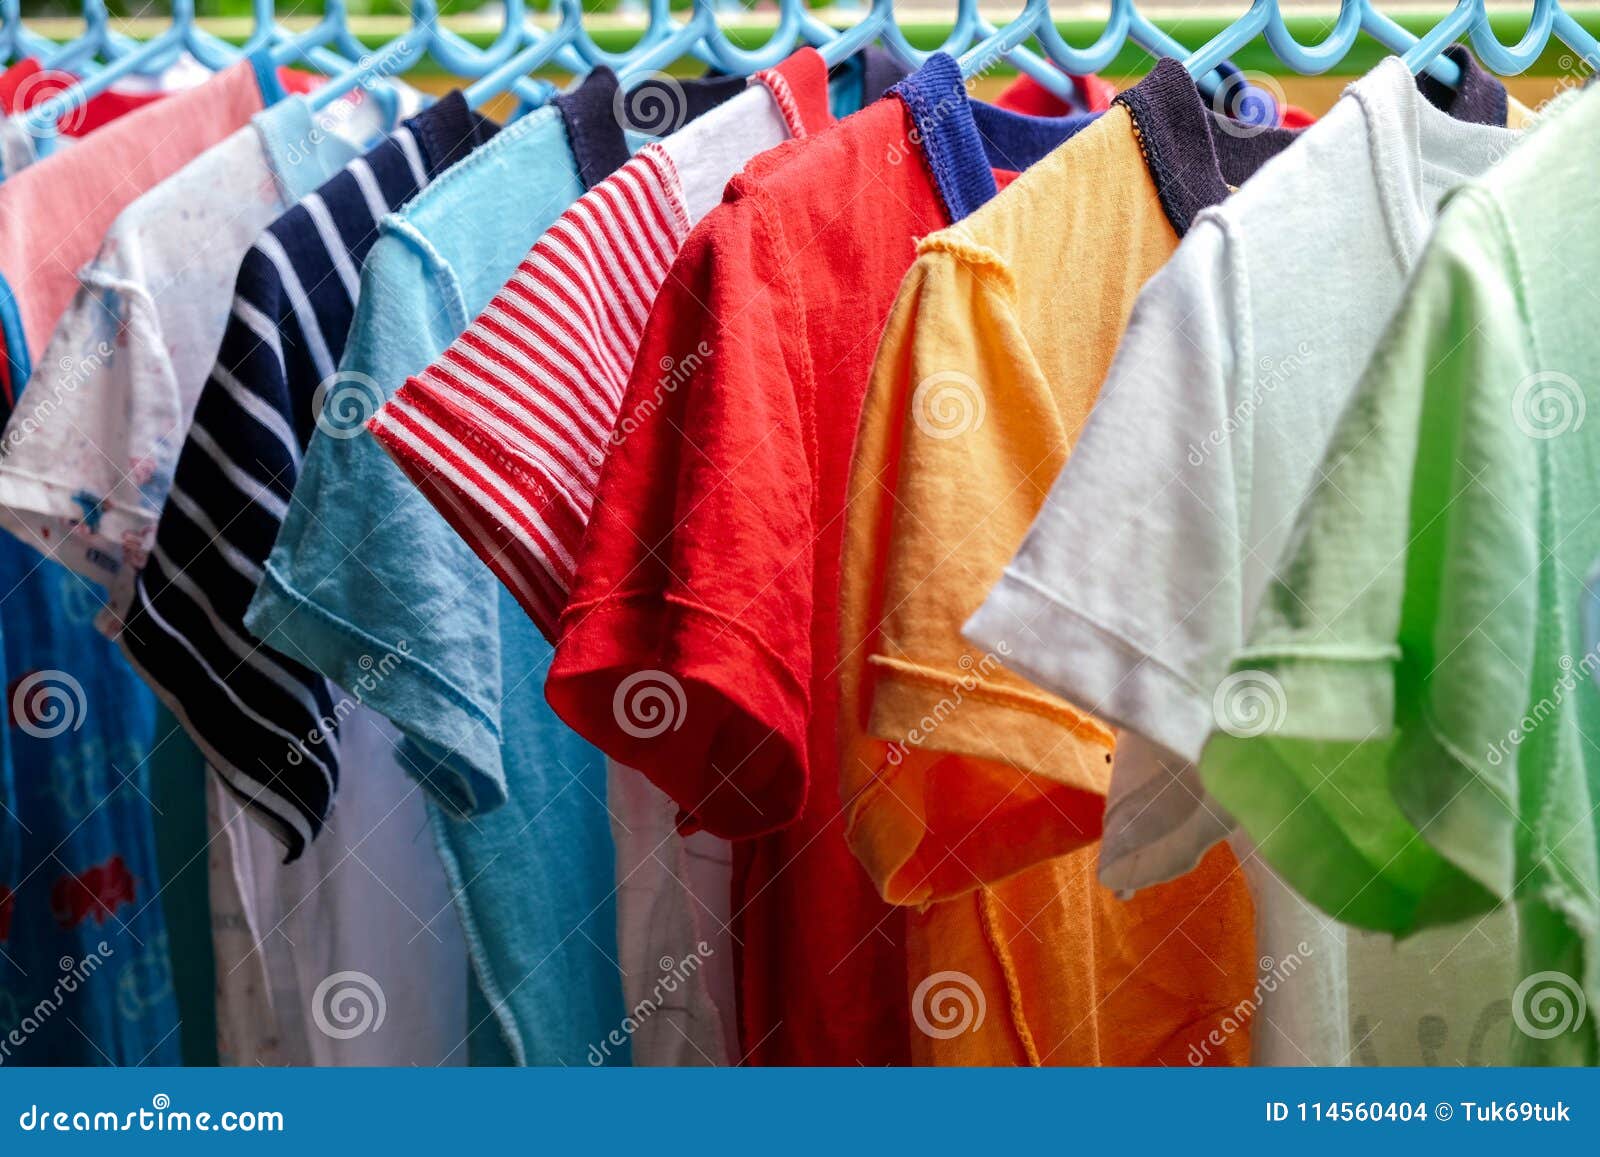 Dry Colorful Clothes in the Sun Stock Photo - Image of hanger, fabric ...